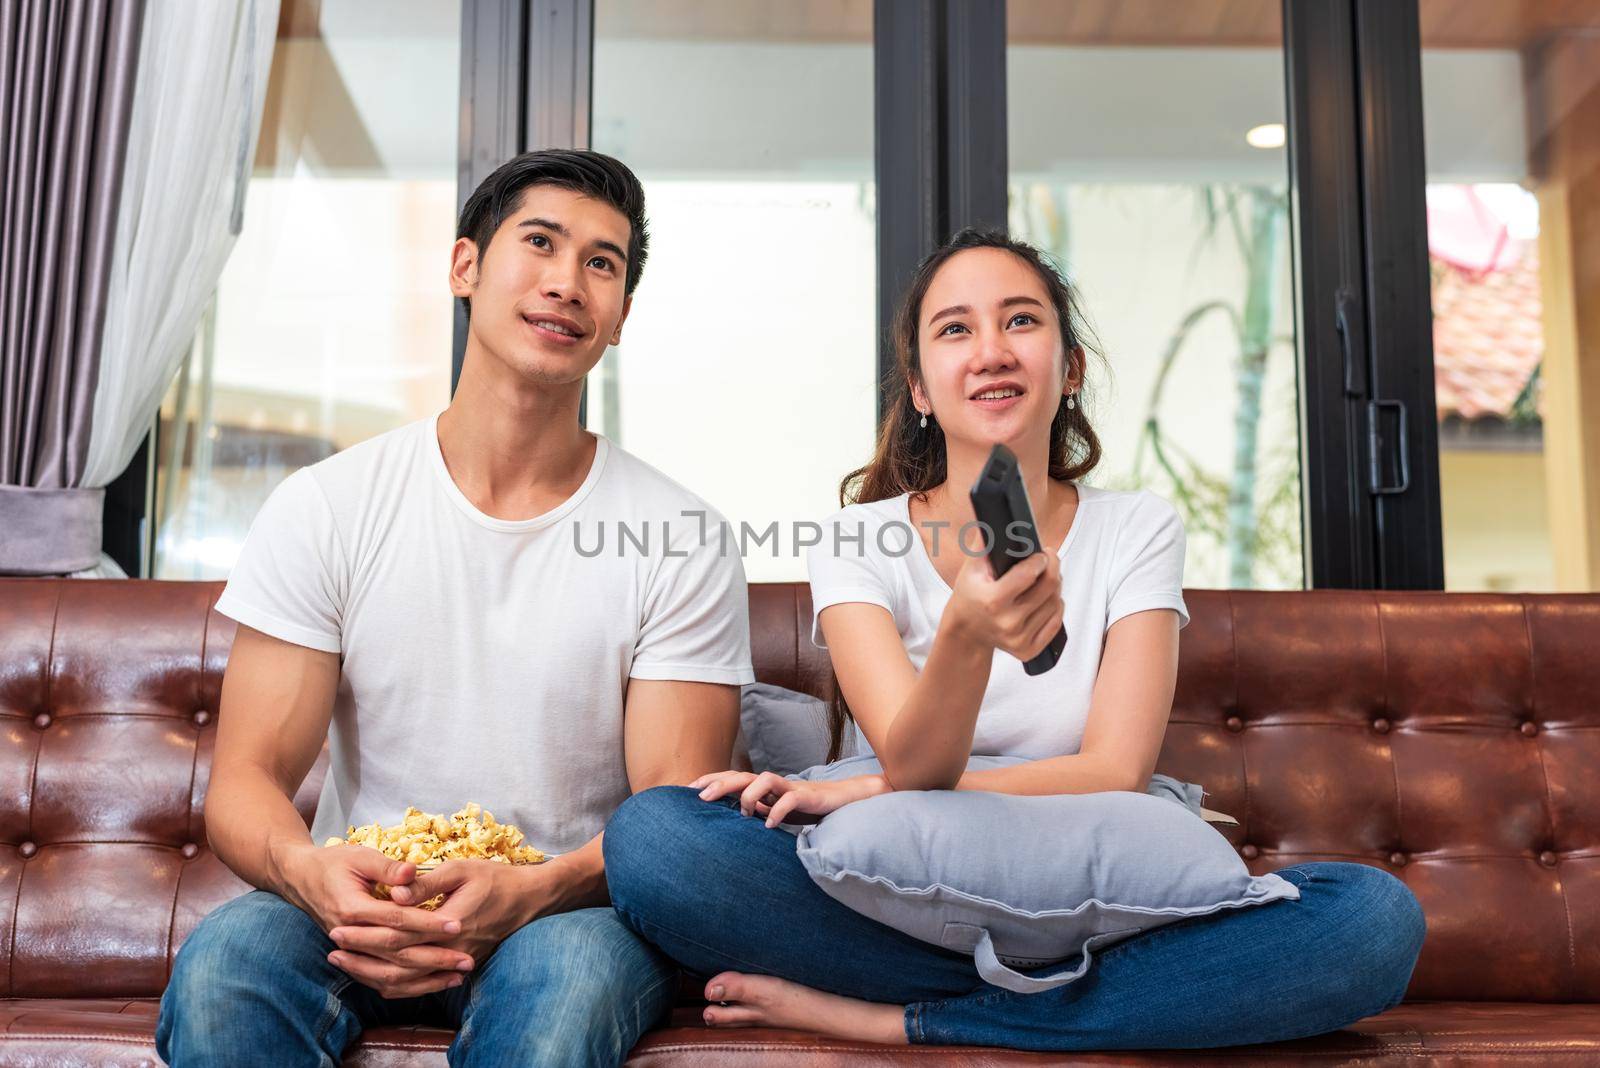 Asian couples watching television together on sofa in their home. People and lifestyles concept. Vacation and holiday concept. Honeymoon and pre wedding theme. Happy family activity in valentines day